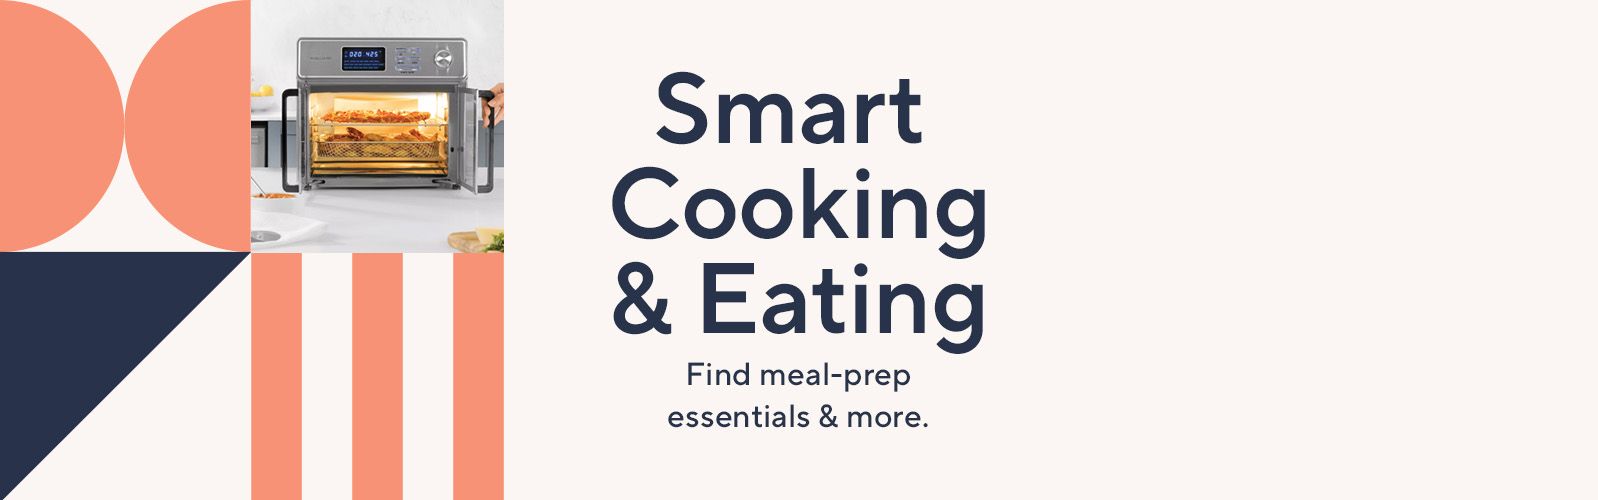 Smart Cooking & Eating: Essentials for meal prep & more.